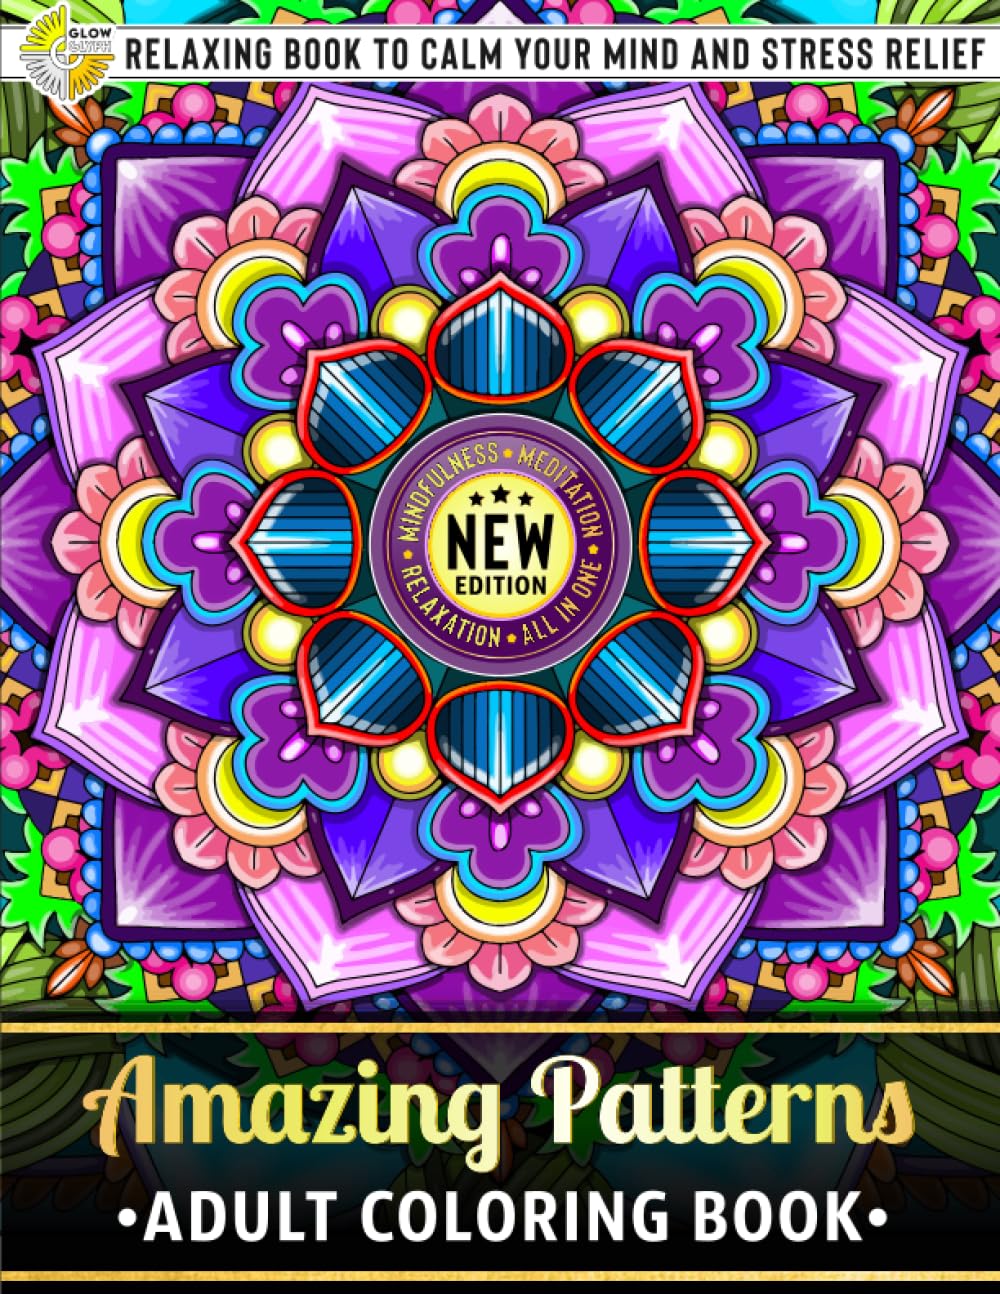 Amazing Patterns: Adult Coloring Book - Over 50 Printed Designs of Beautiful Pattern Relaxing Book to Calm your Mind and Stress Relief